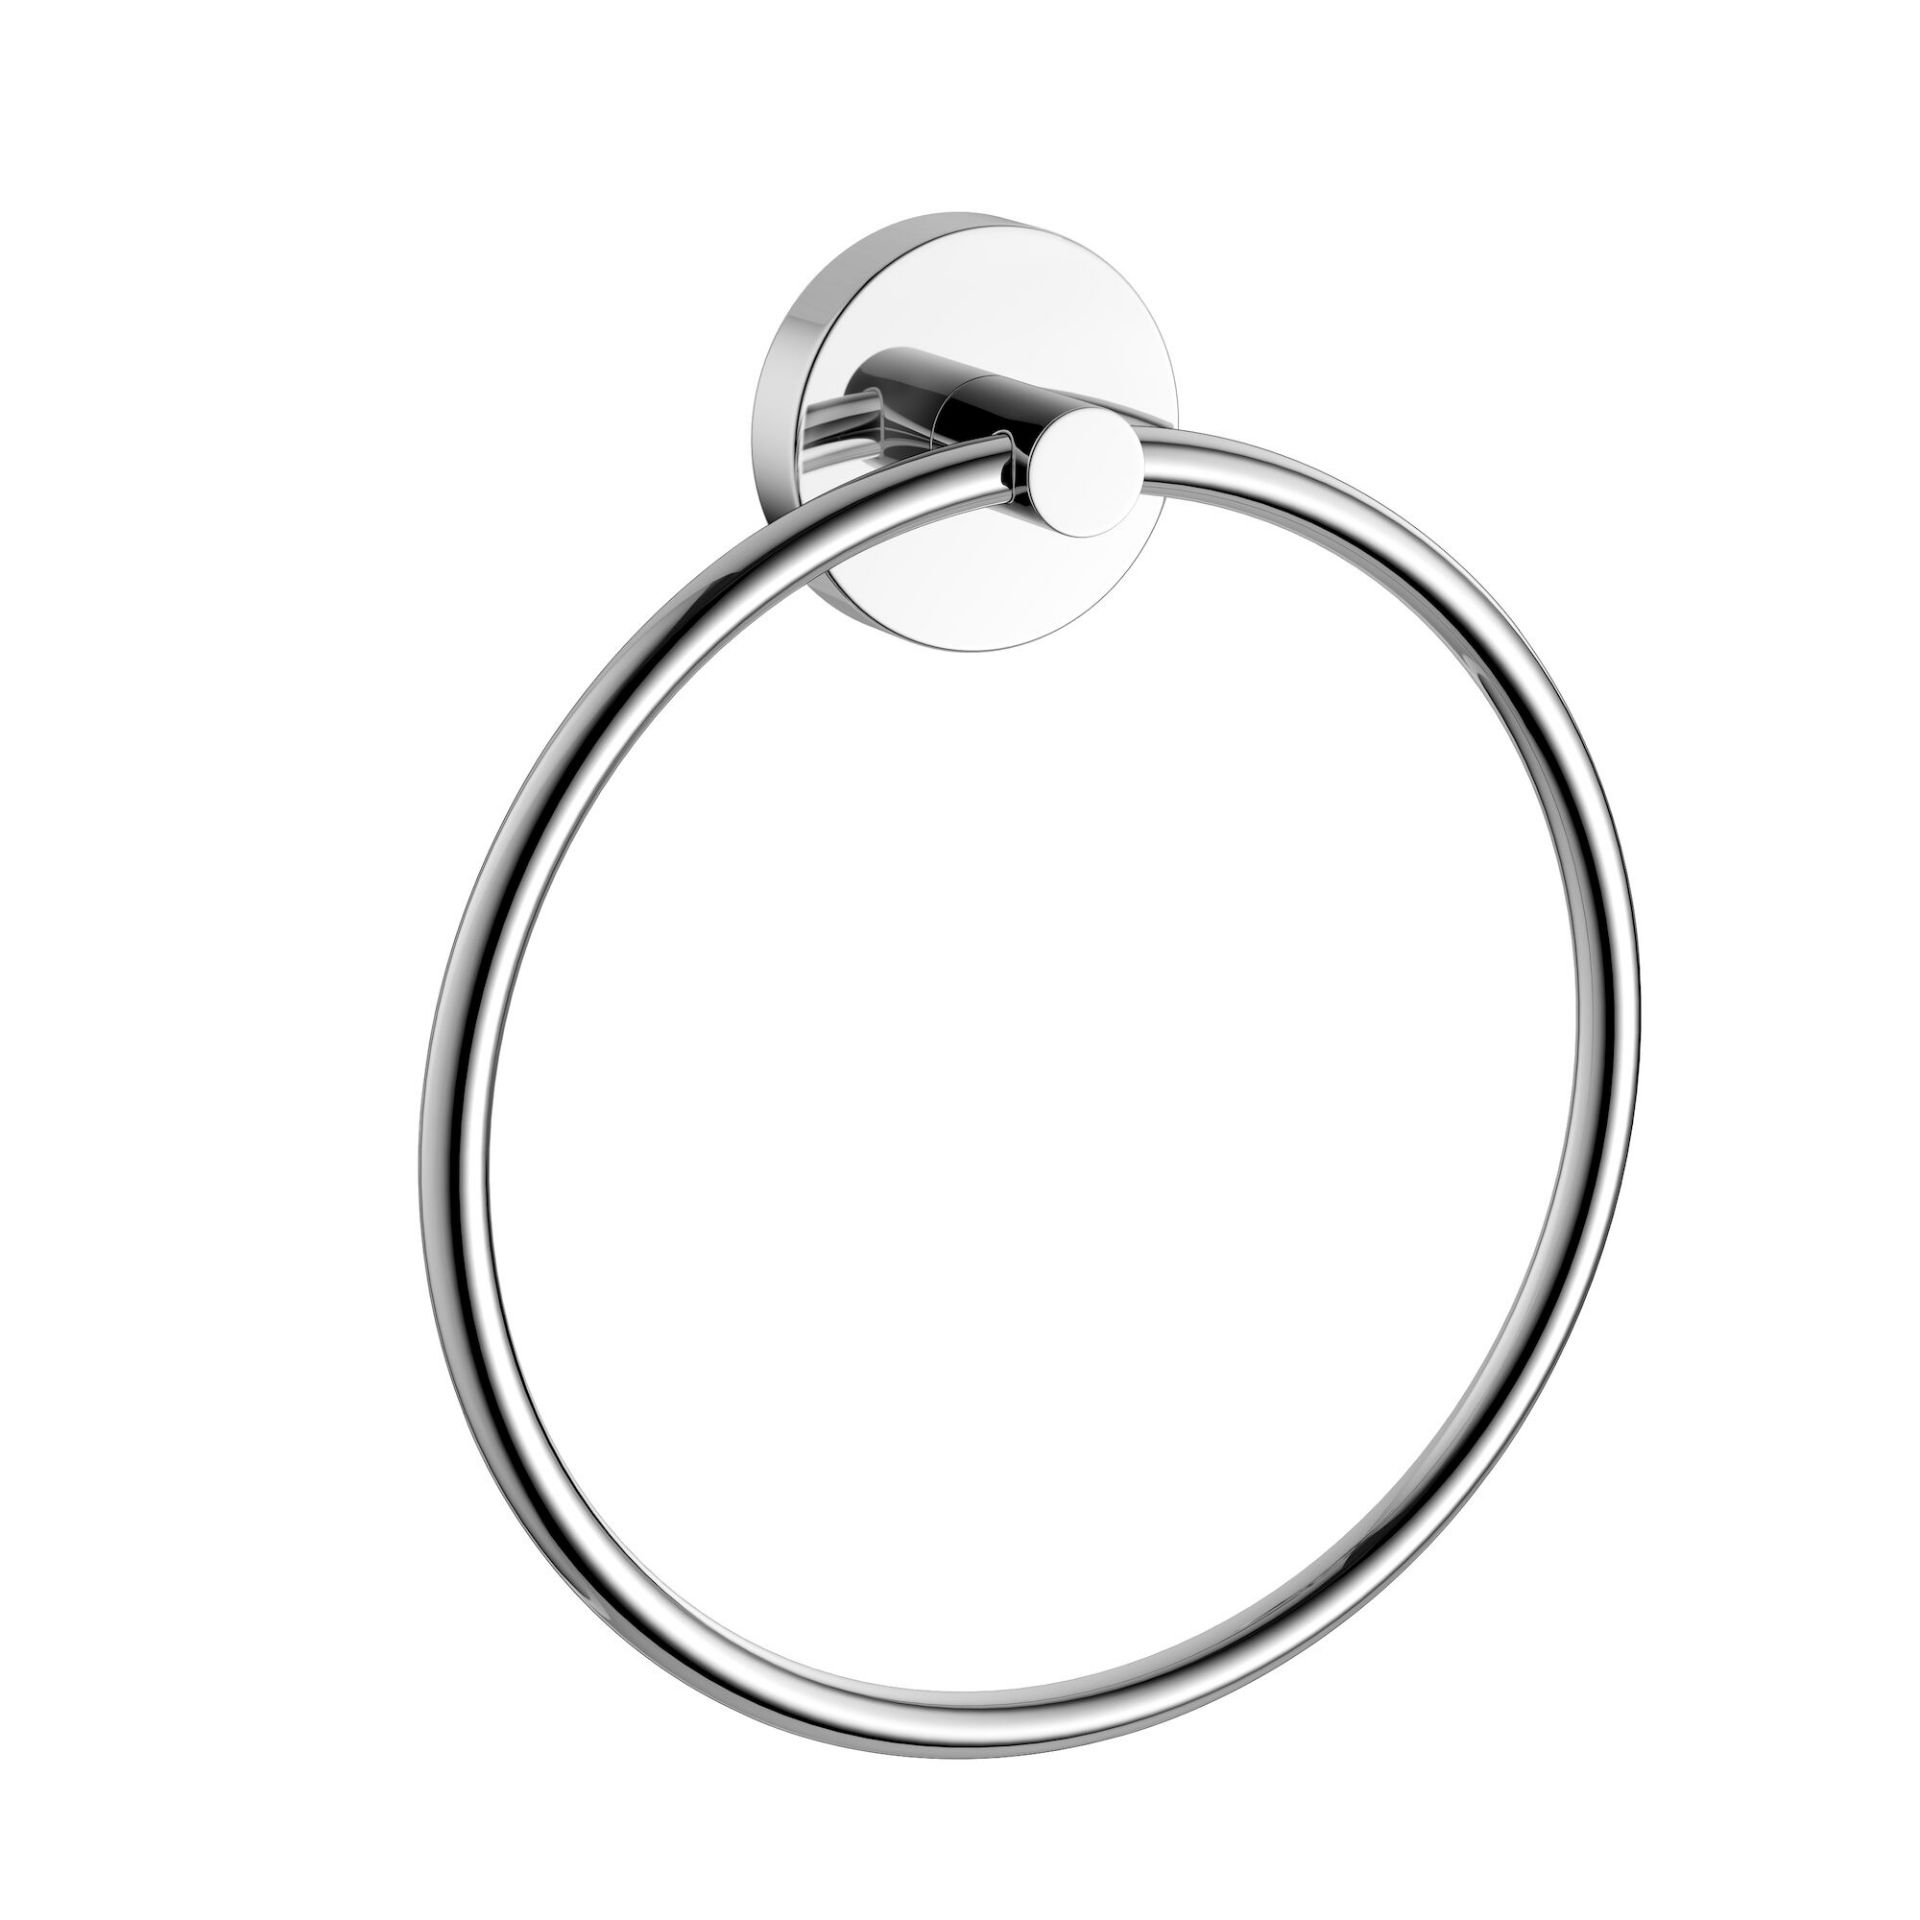 (CP100) Finsbury Towel Ring. Simple yet stylish Completes your bathroom with a little extra - Image 2 of 3